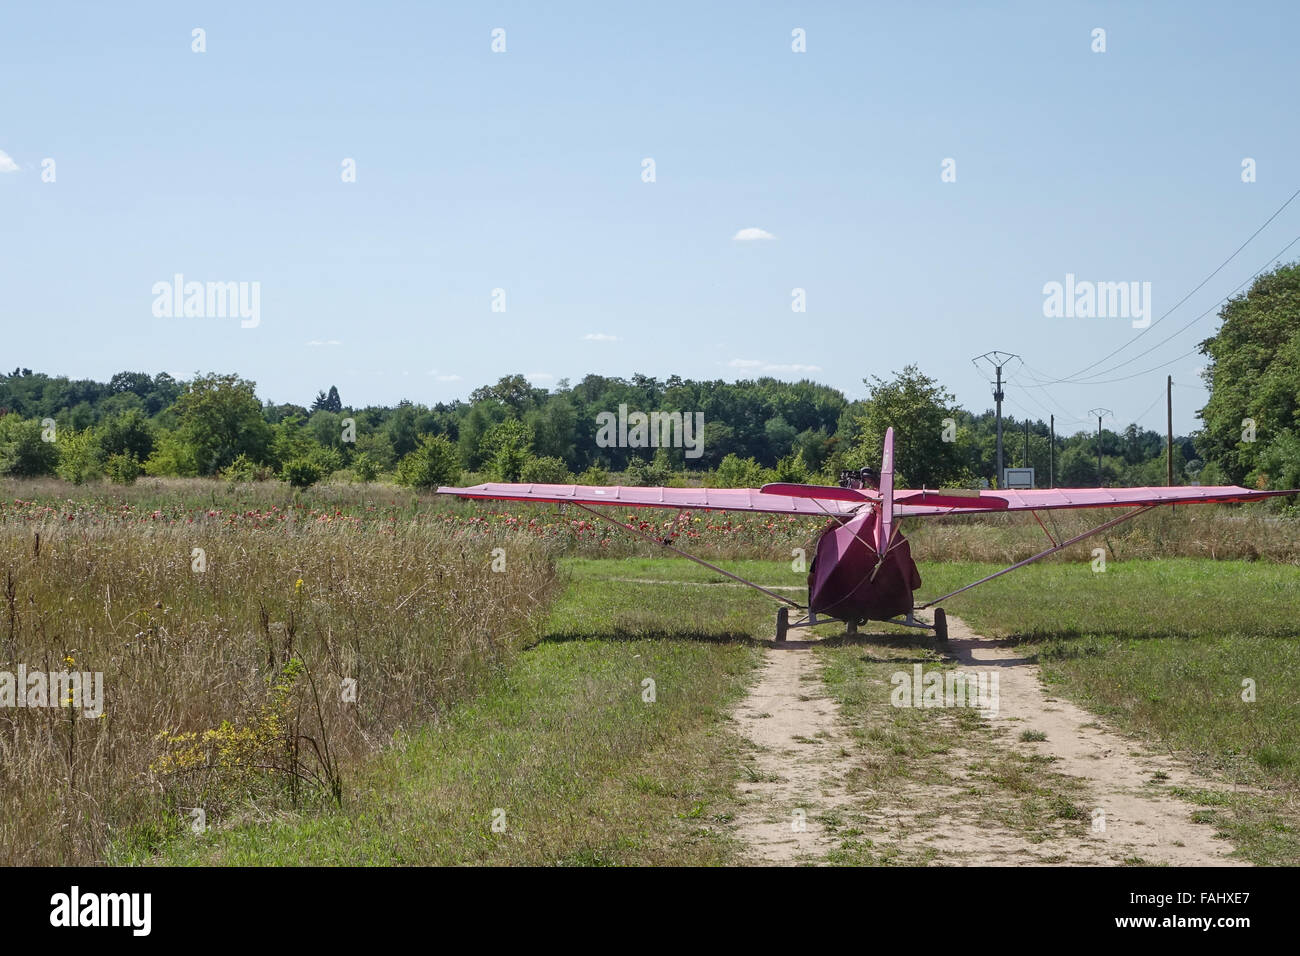 ULM Microlite, purple Microlight plane taxiing for take off near Francueil, Loire Valley, France Stock Photo